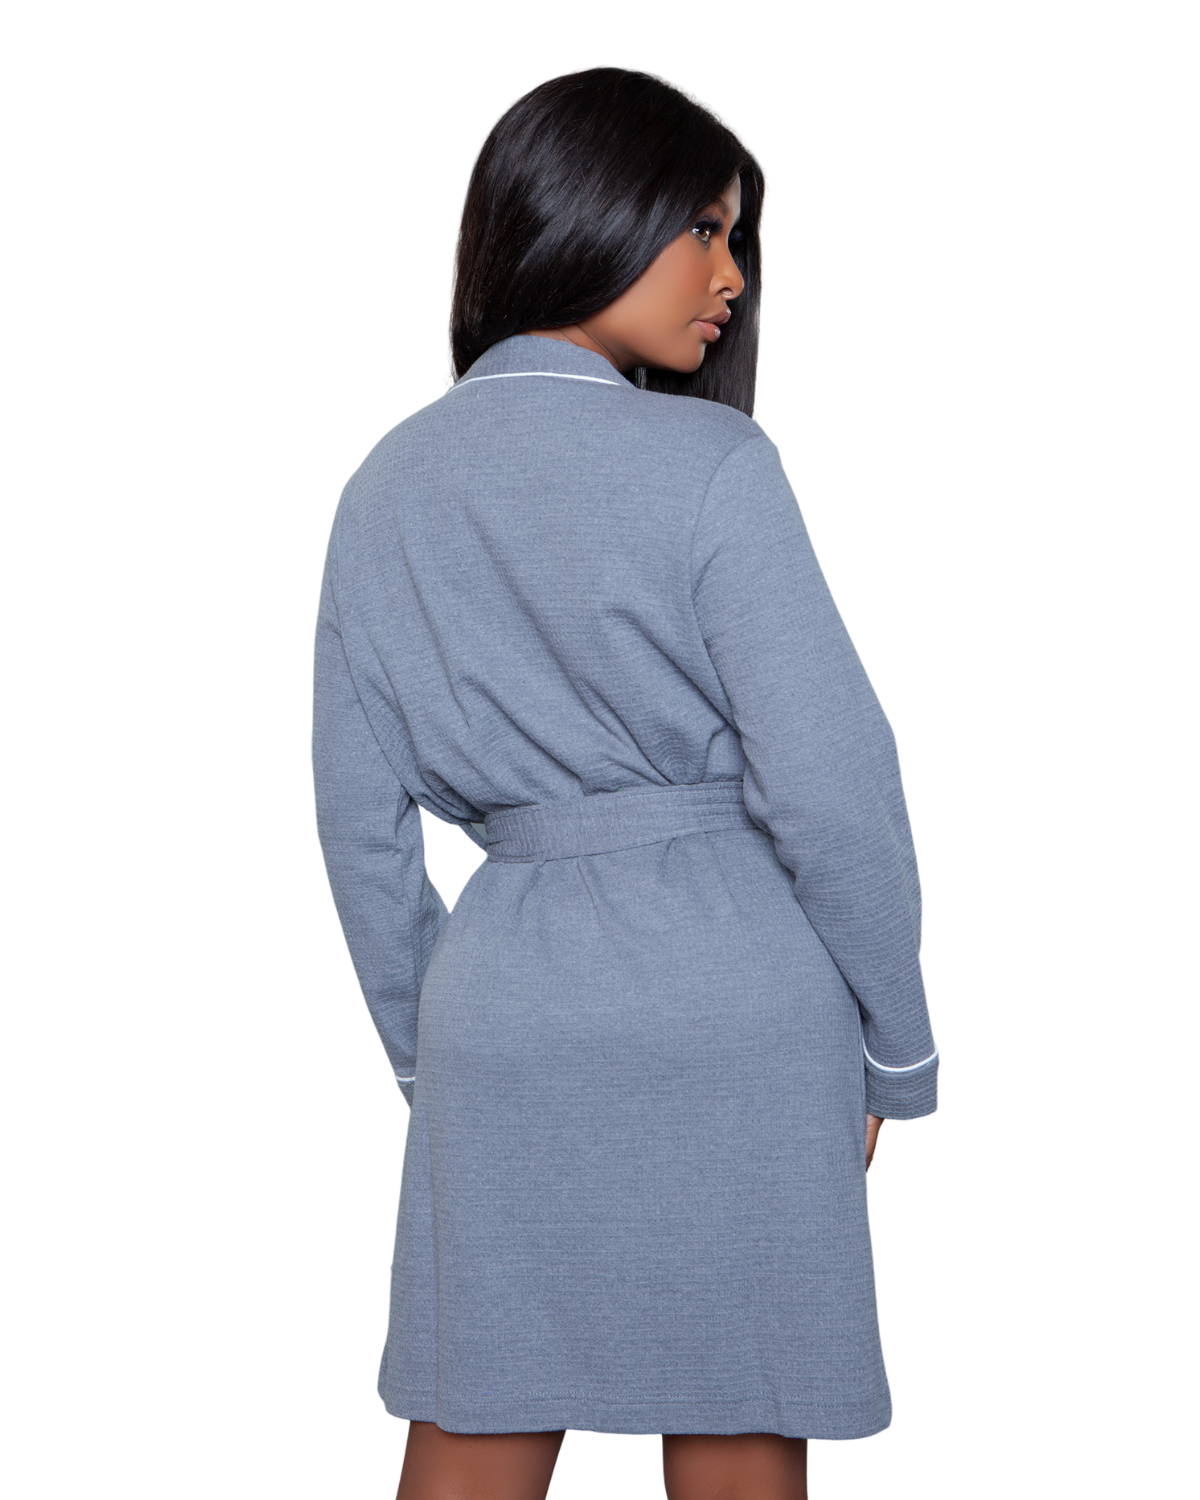 Model wearing a knee length robe in grey with white trim